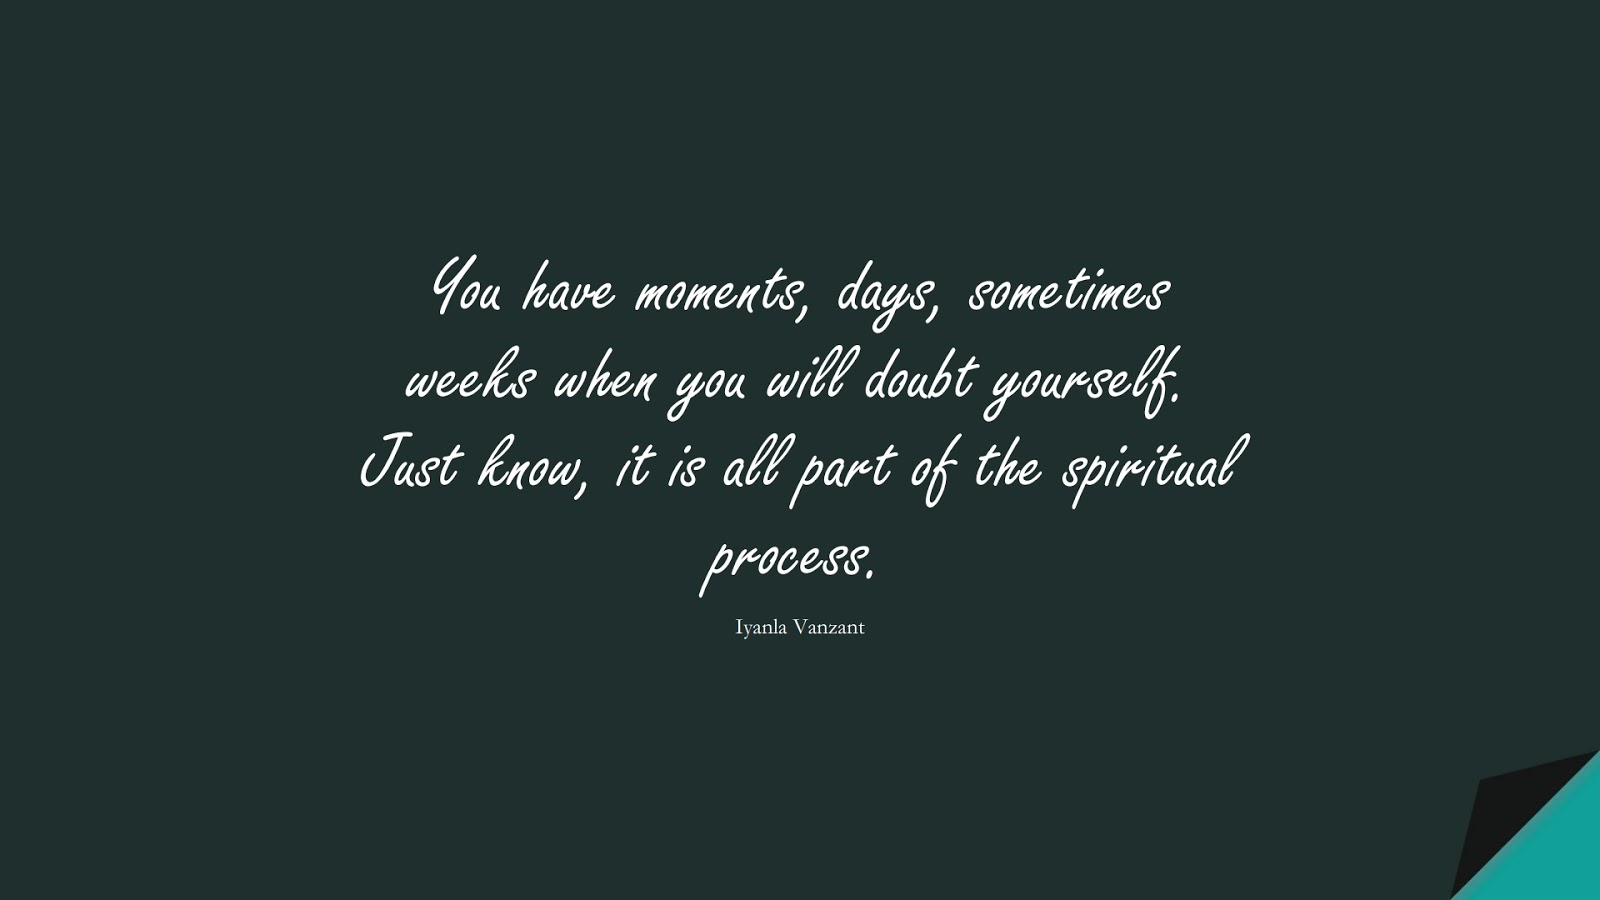 You have moments, days, sometimes weeks when you will doubt yourself. Just know, it is all part of the spiritual process. (Iyanla Vanzant);  #SelfEsteemQuotes